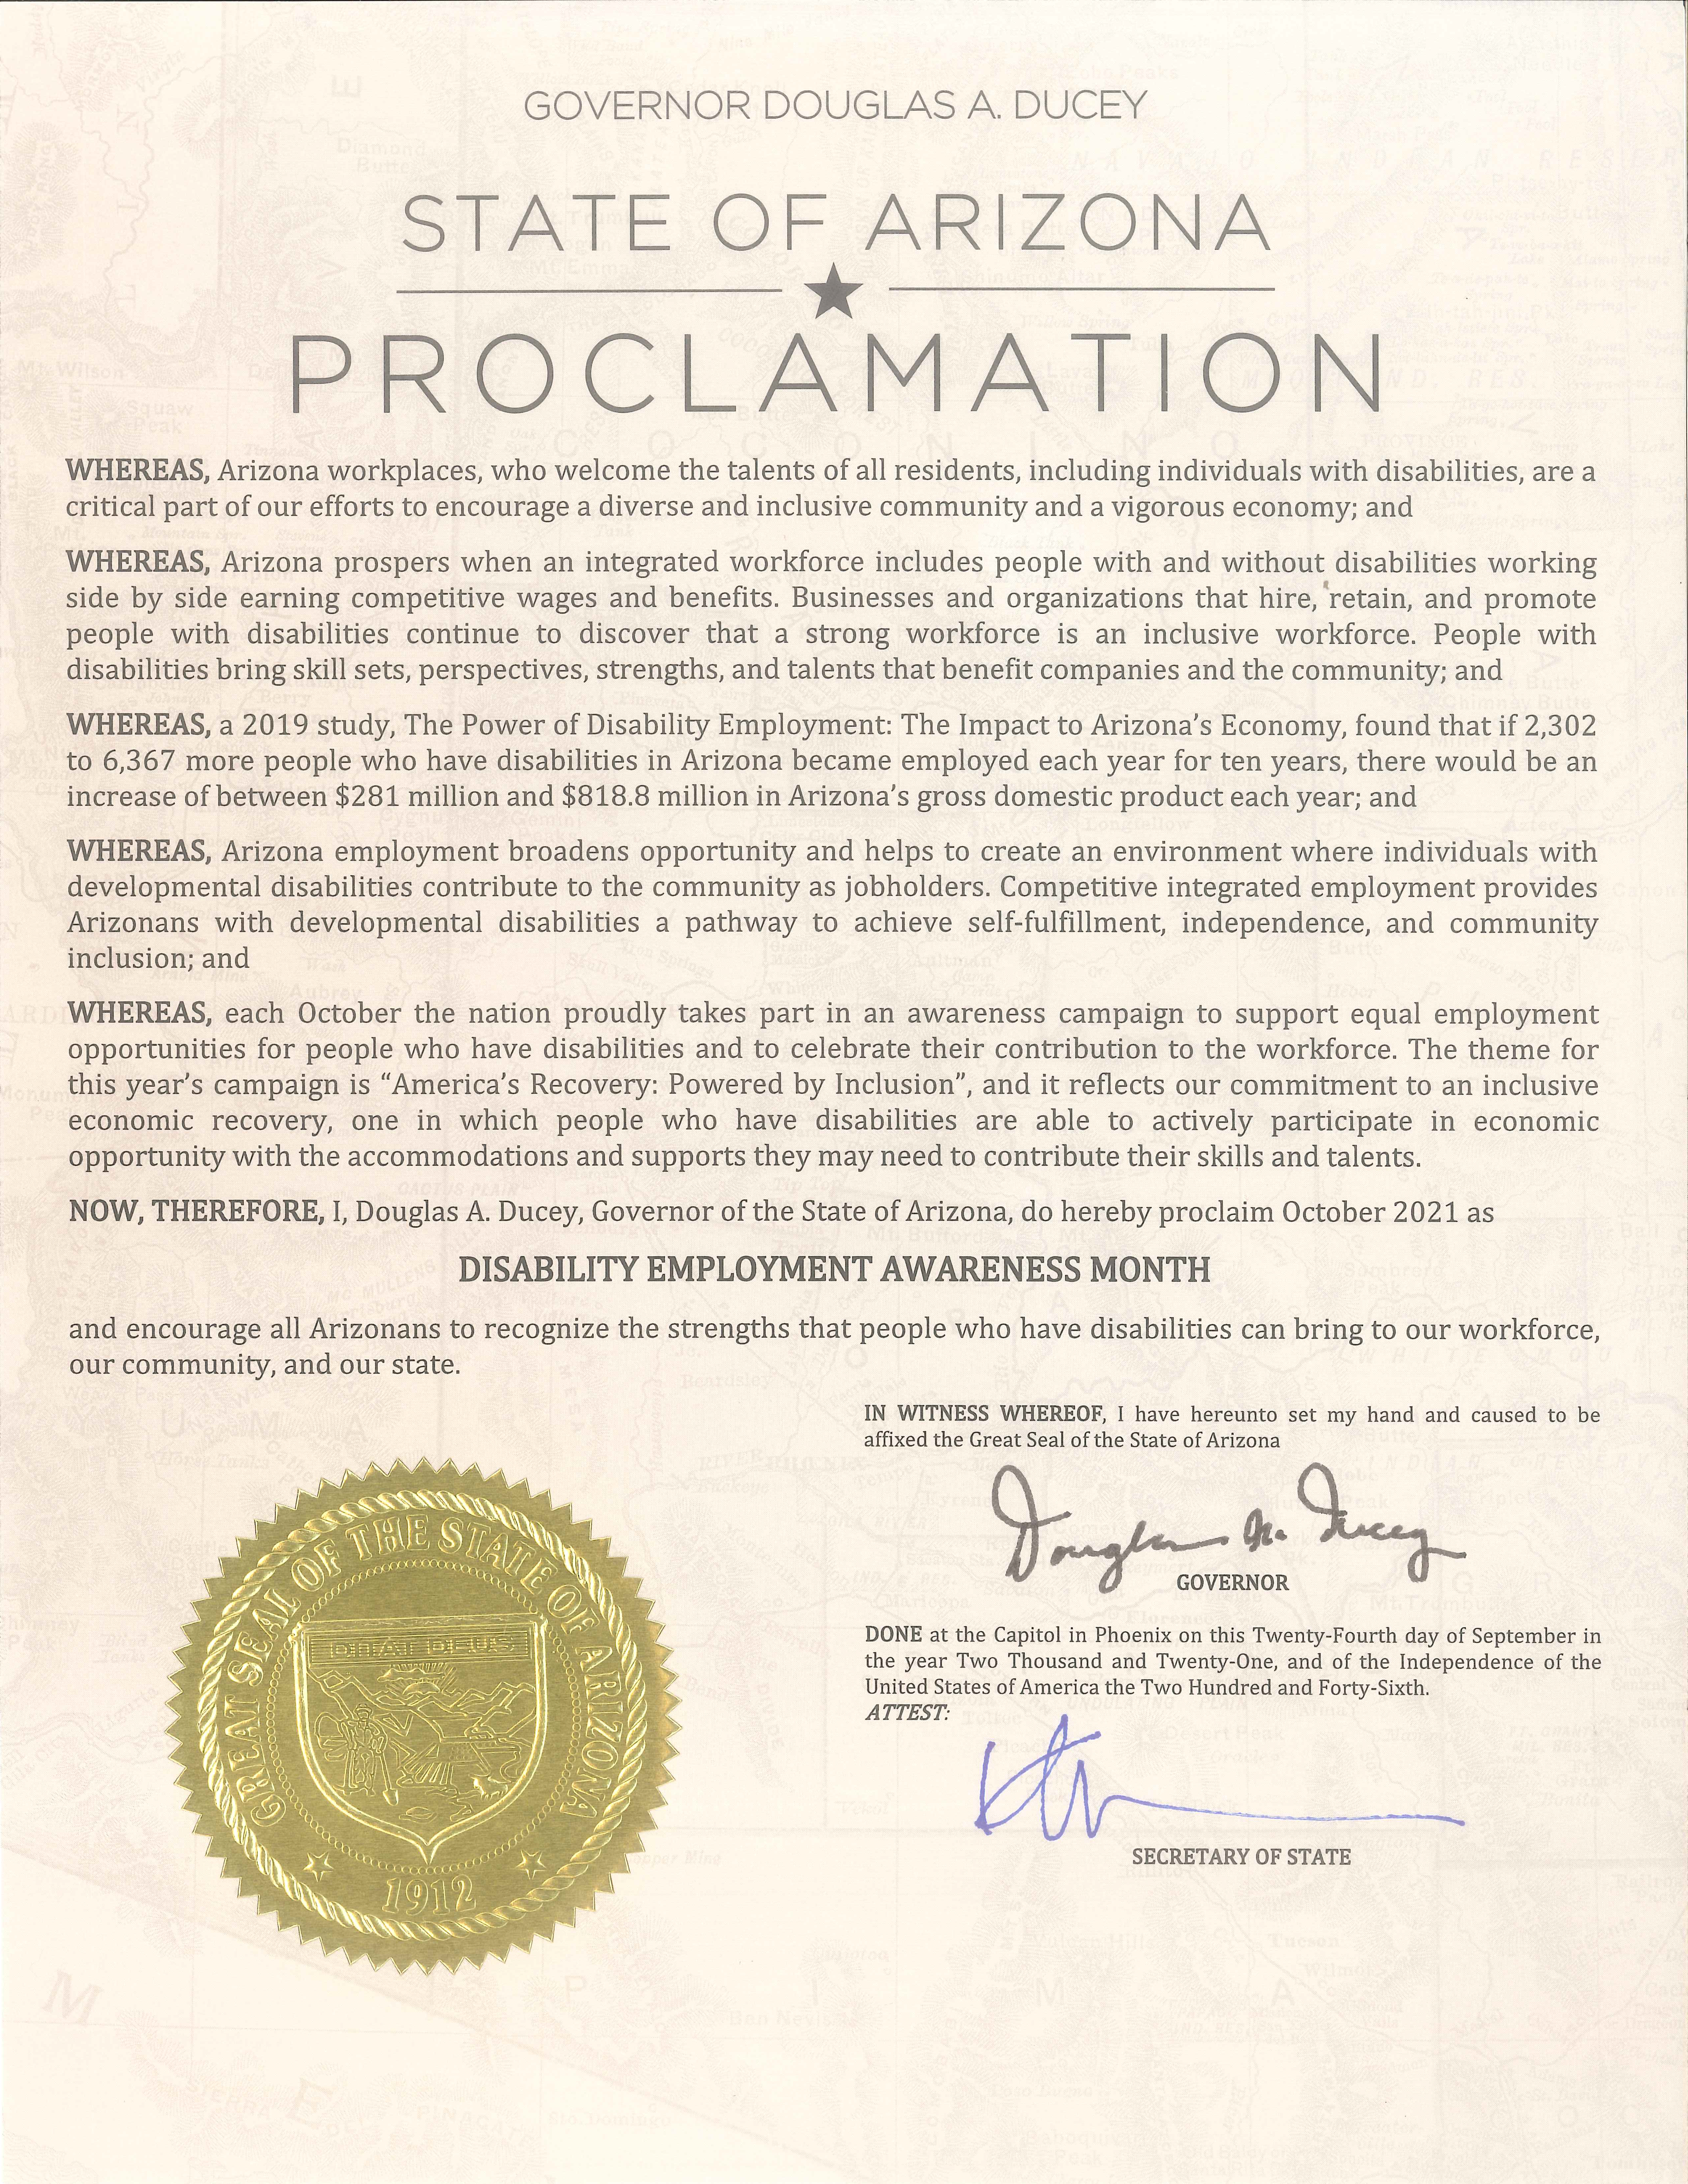 Image of October 2021 Disability Employment Awareness Month in Arizona